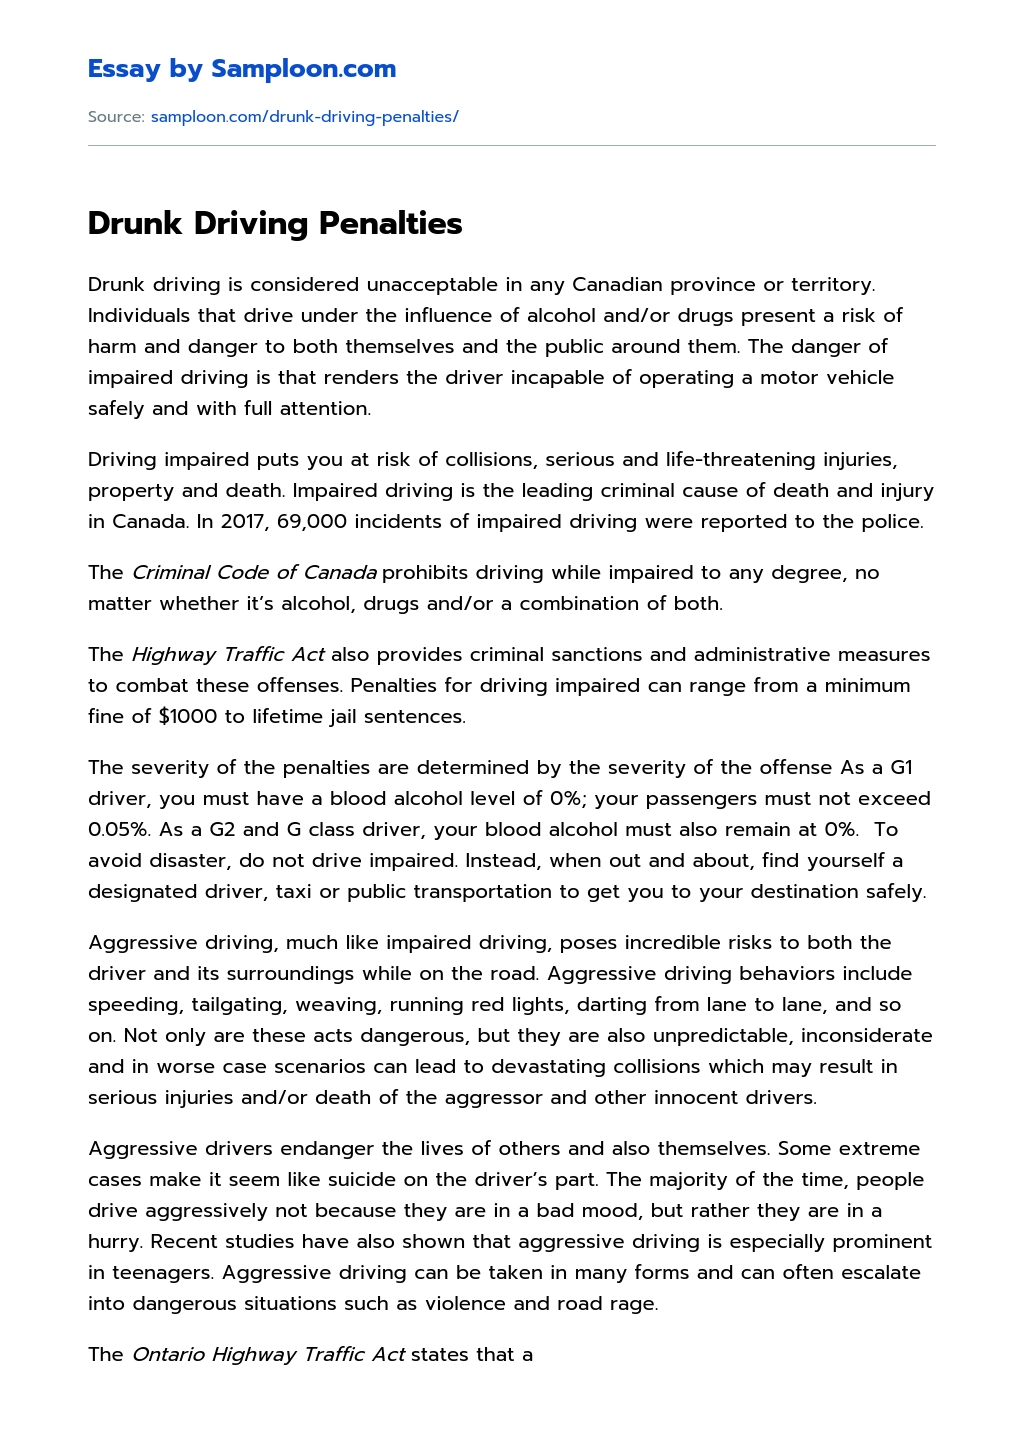 Drunk Driving Penalties Research Paper essay